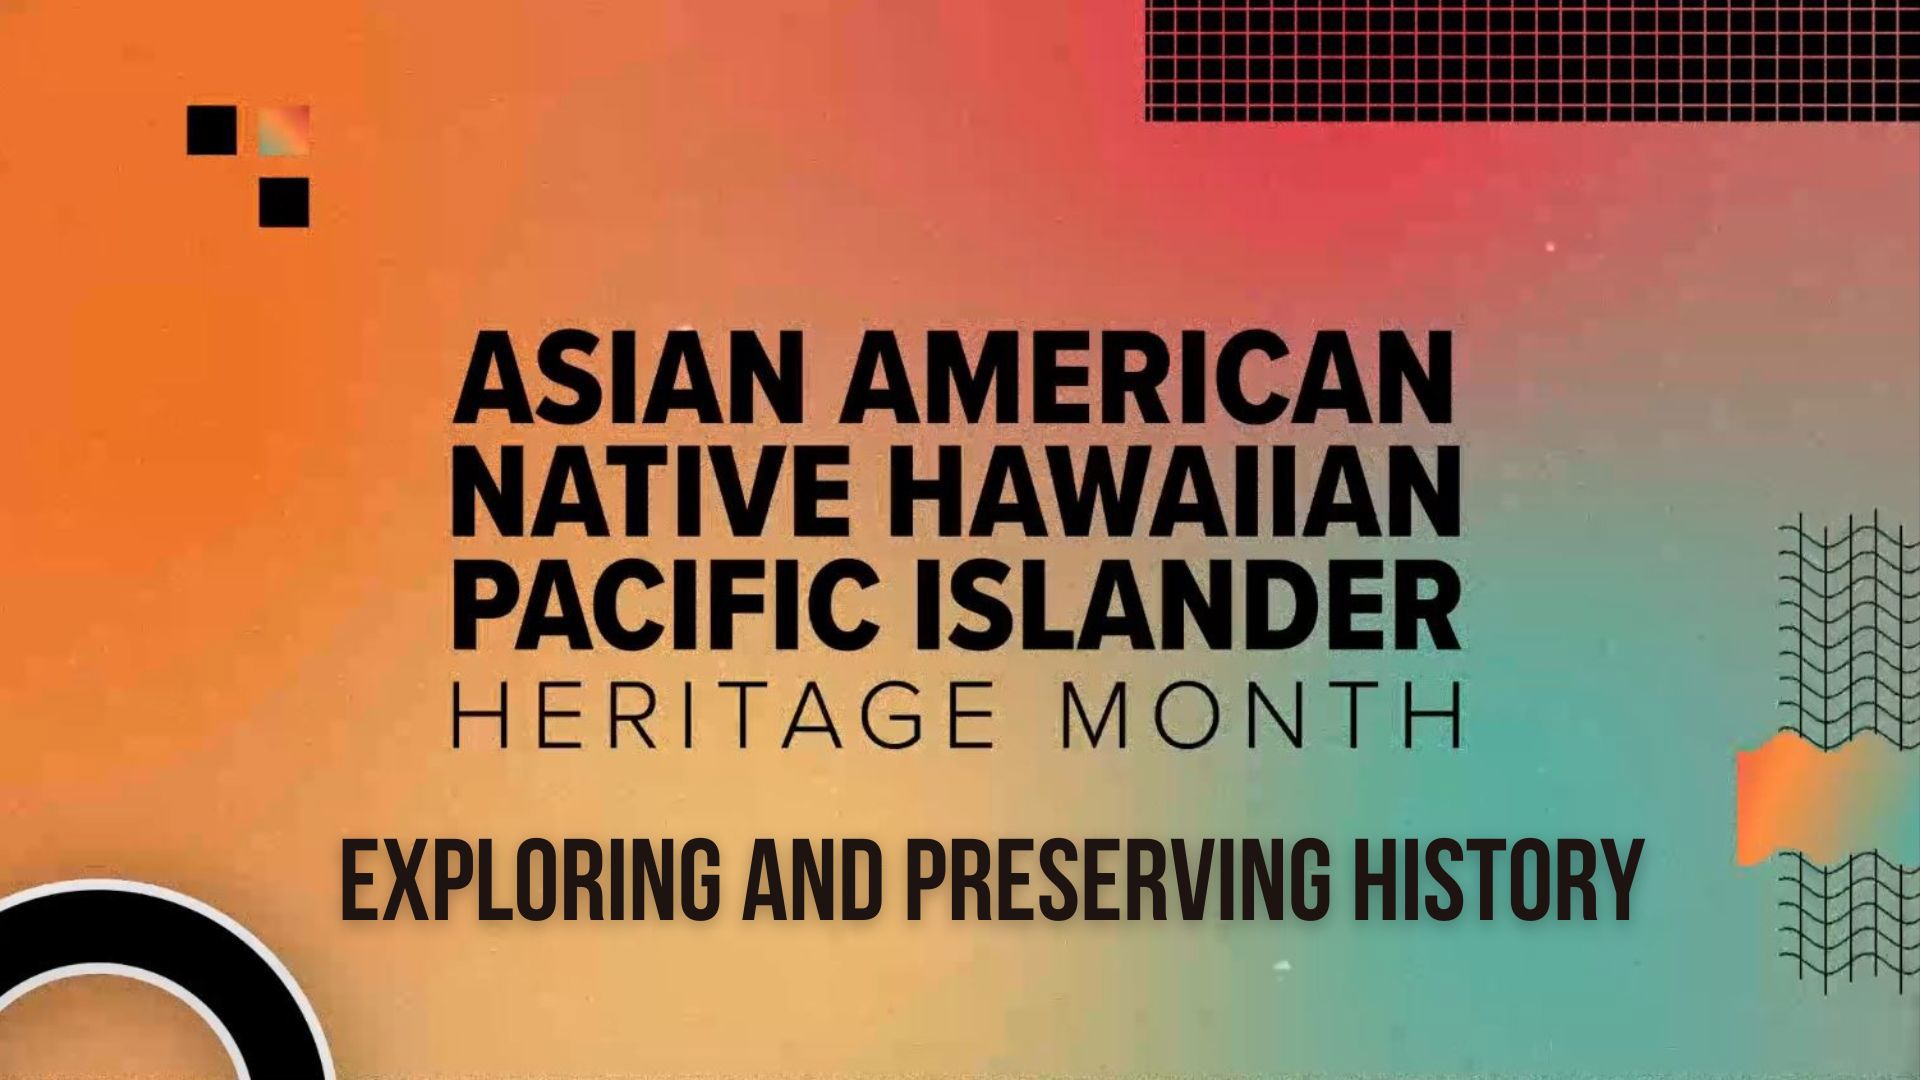 This AANHPI Heritage Month, we are exploring the history hidden in plain sight. A look at efforts to inform the present and take back forgotten history.